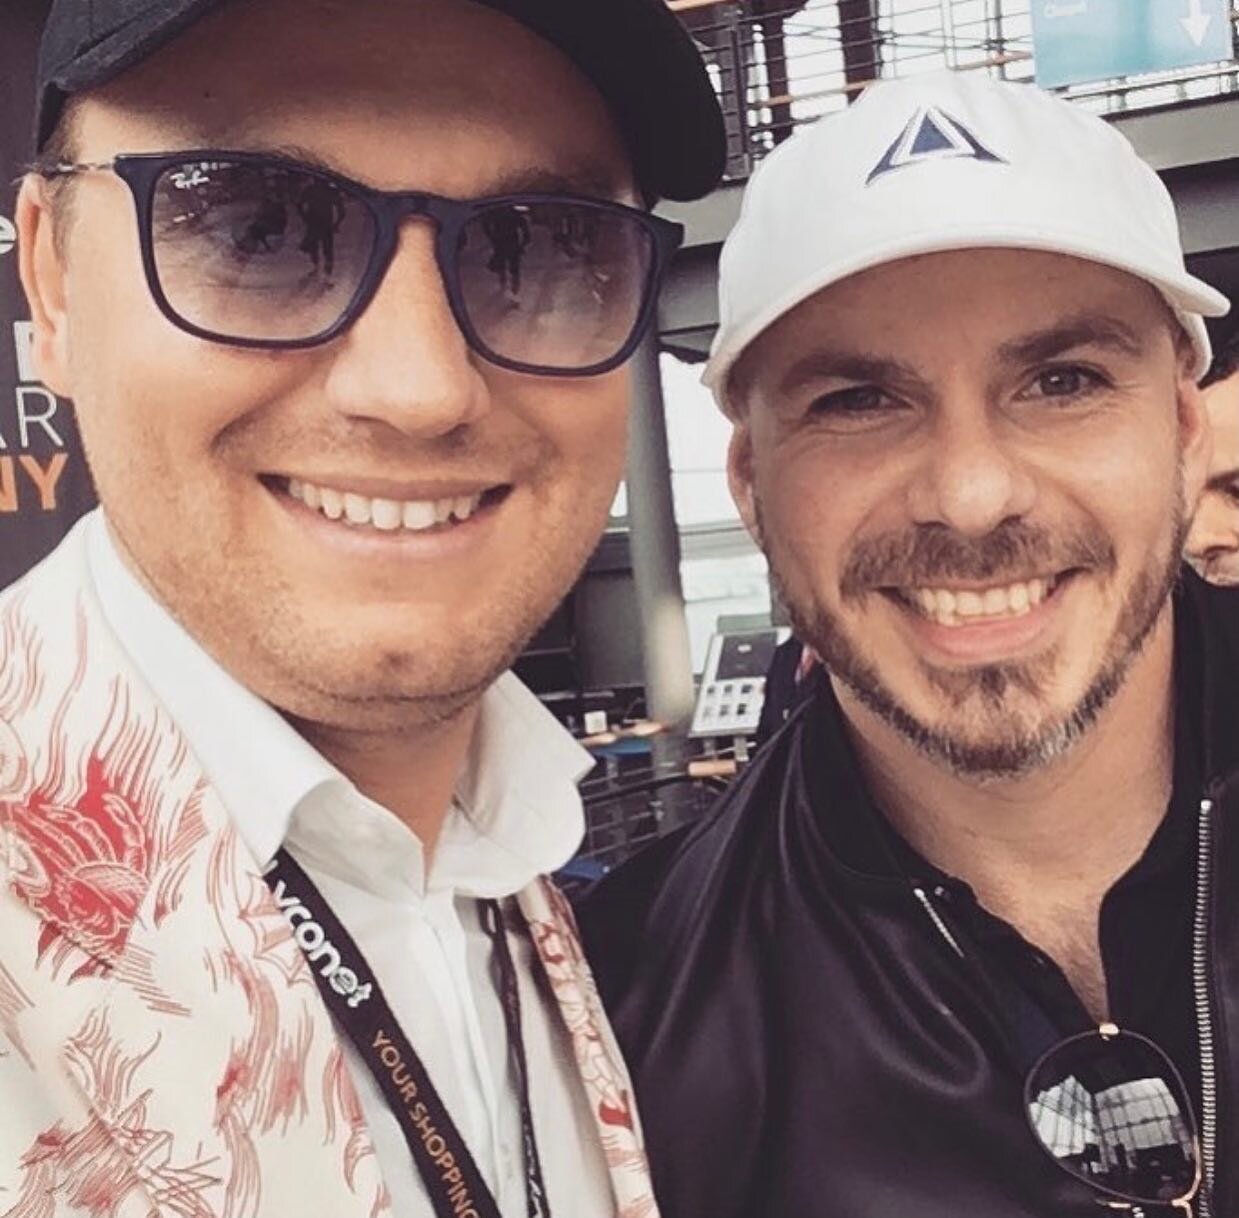 @pitbull in his customized @limitlesslgnds hat, always taking the time to stop and show love to his fans. He&rsquo;s the true definition of a Limitless Legend. #LiveLimitless #LimitlessLegends #AspireToInspire #UnleashYourPotential #CreateYourLegacy